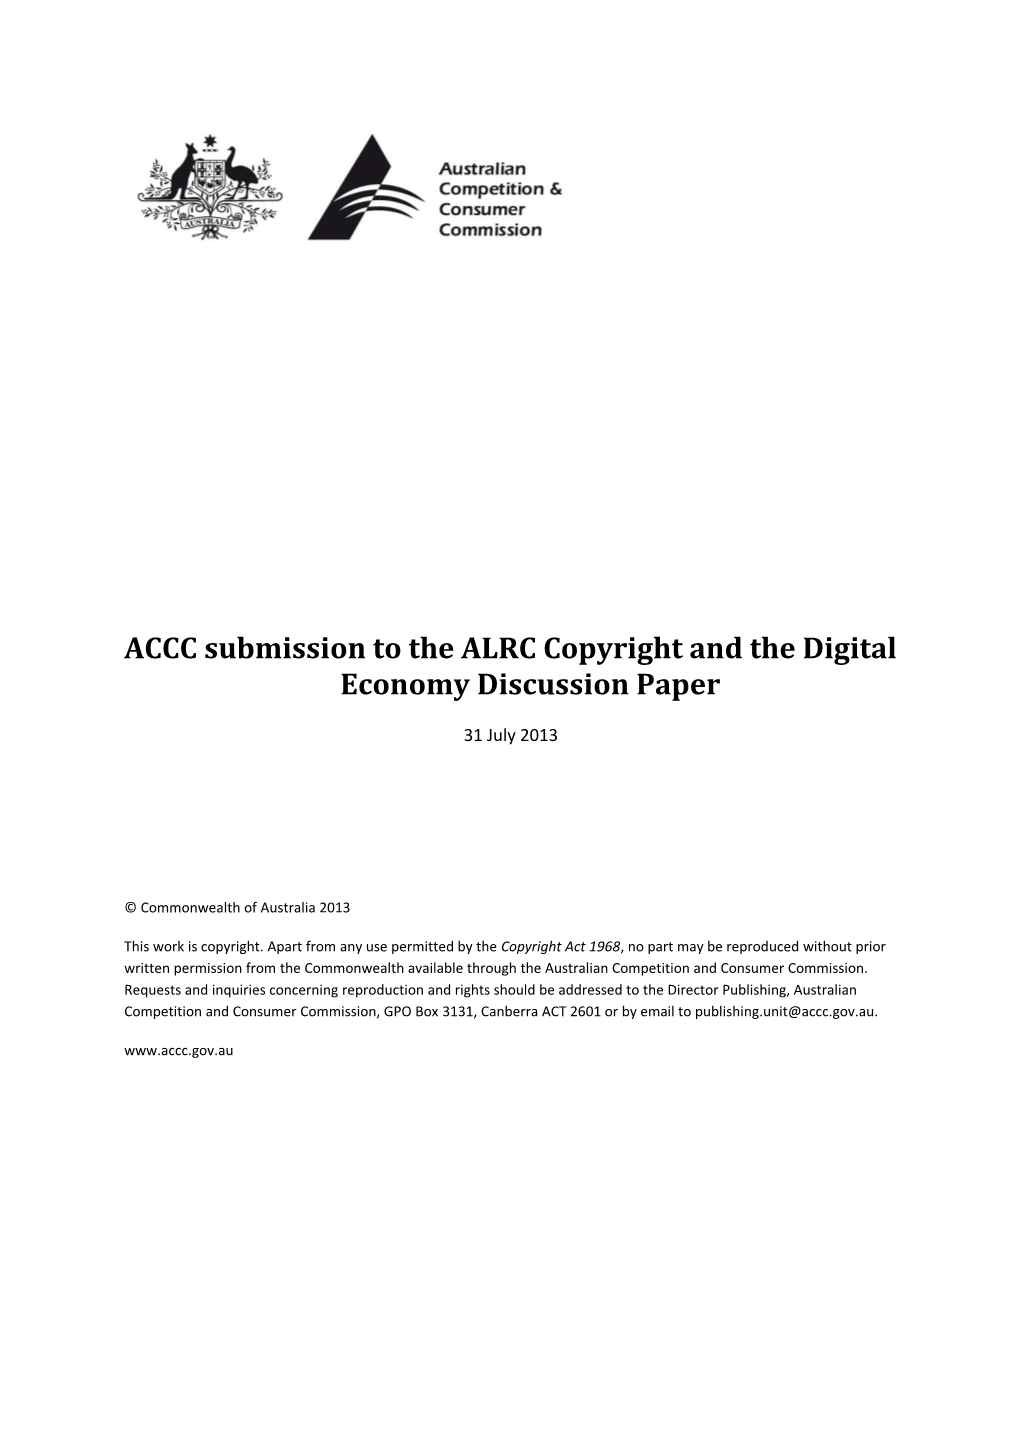 ACCC Submission to the ALRC Copyright and the Digital Economy Discussion Paper